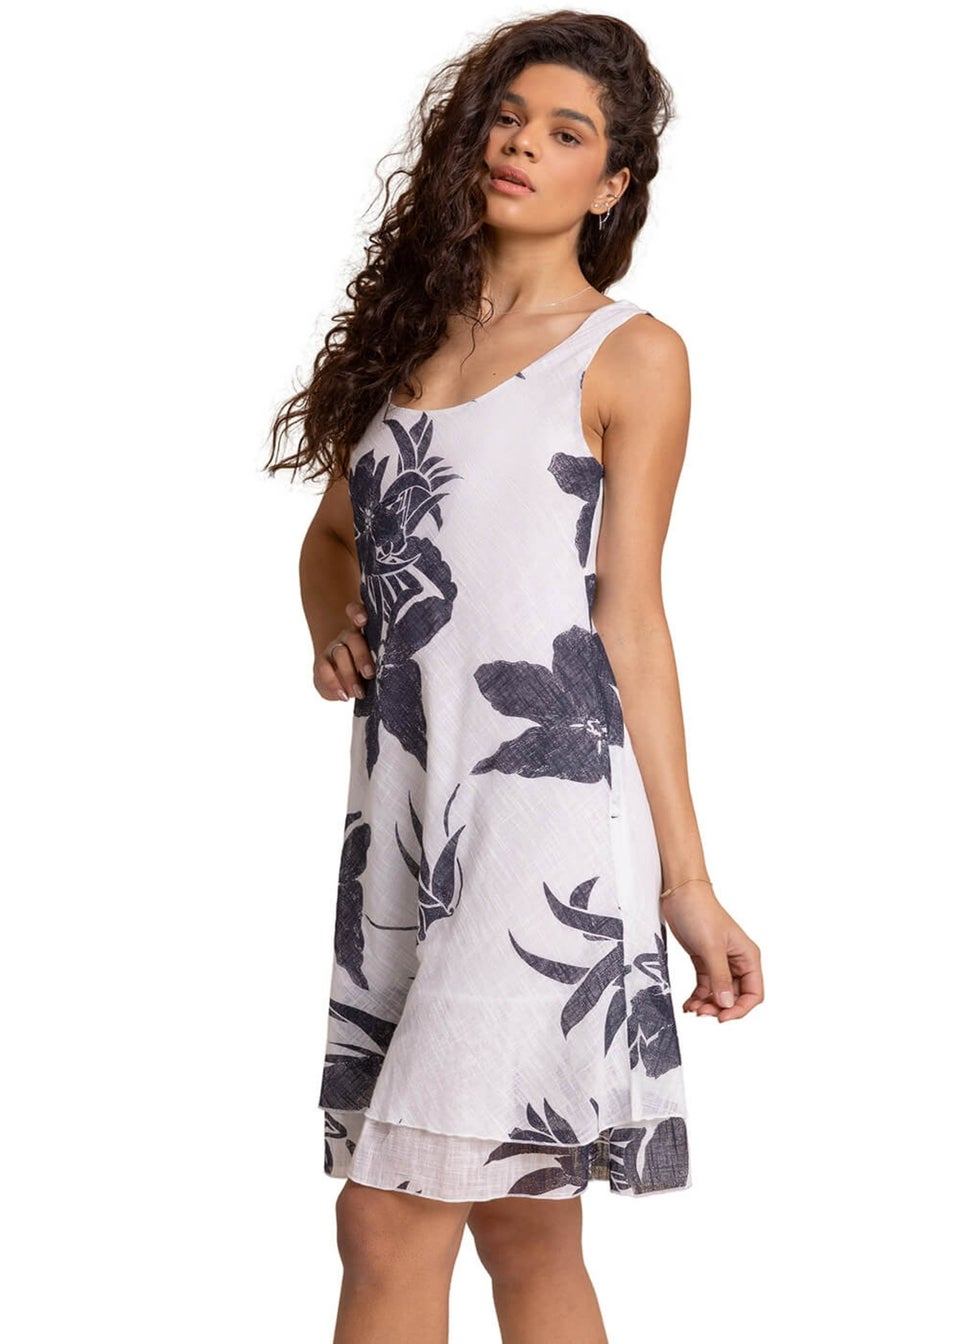 Roman White Floral Print Layered Fit & Flare Dress